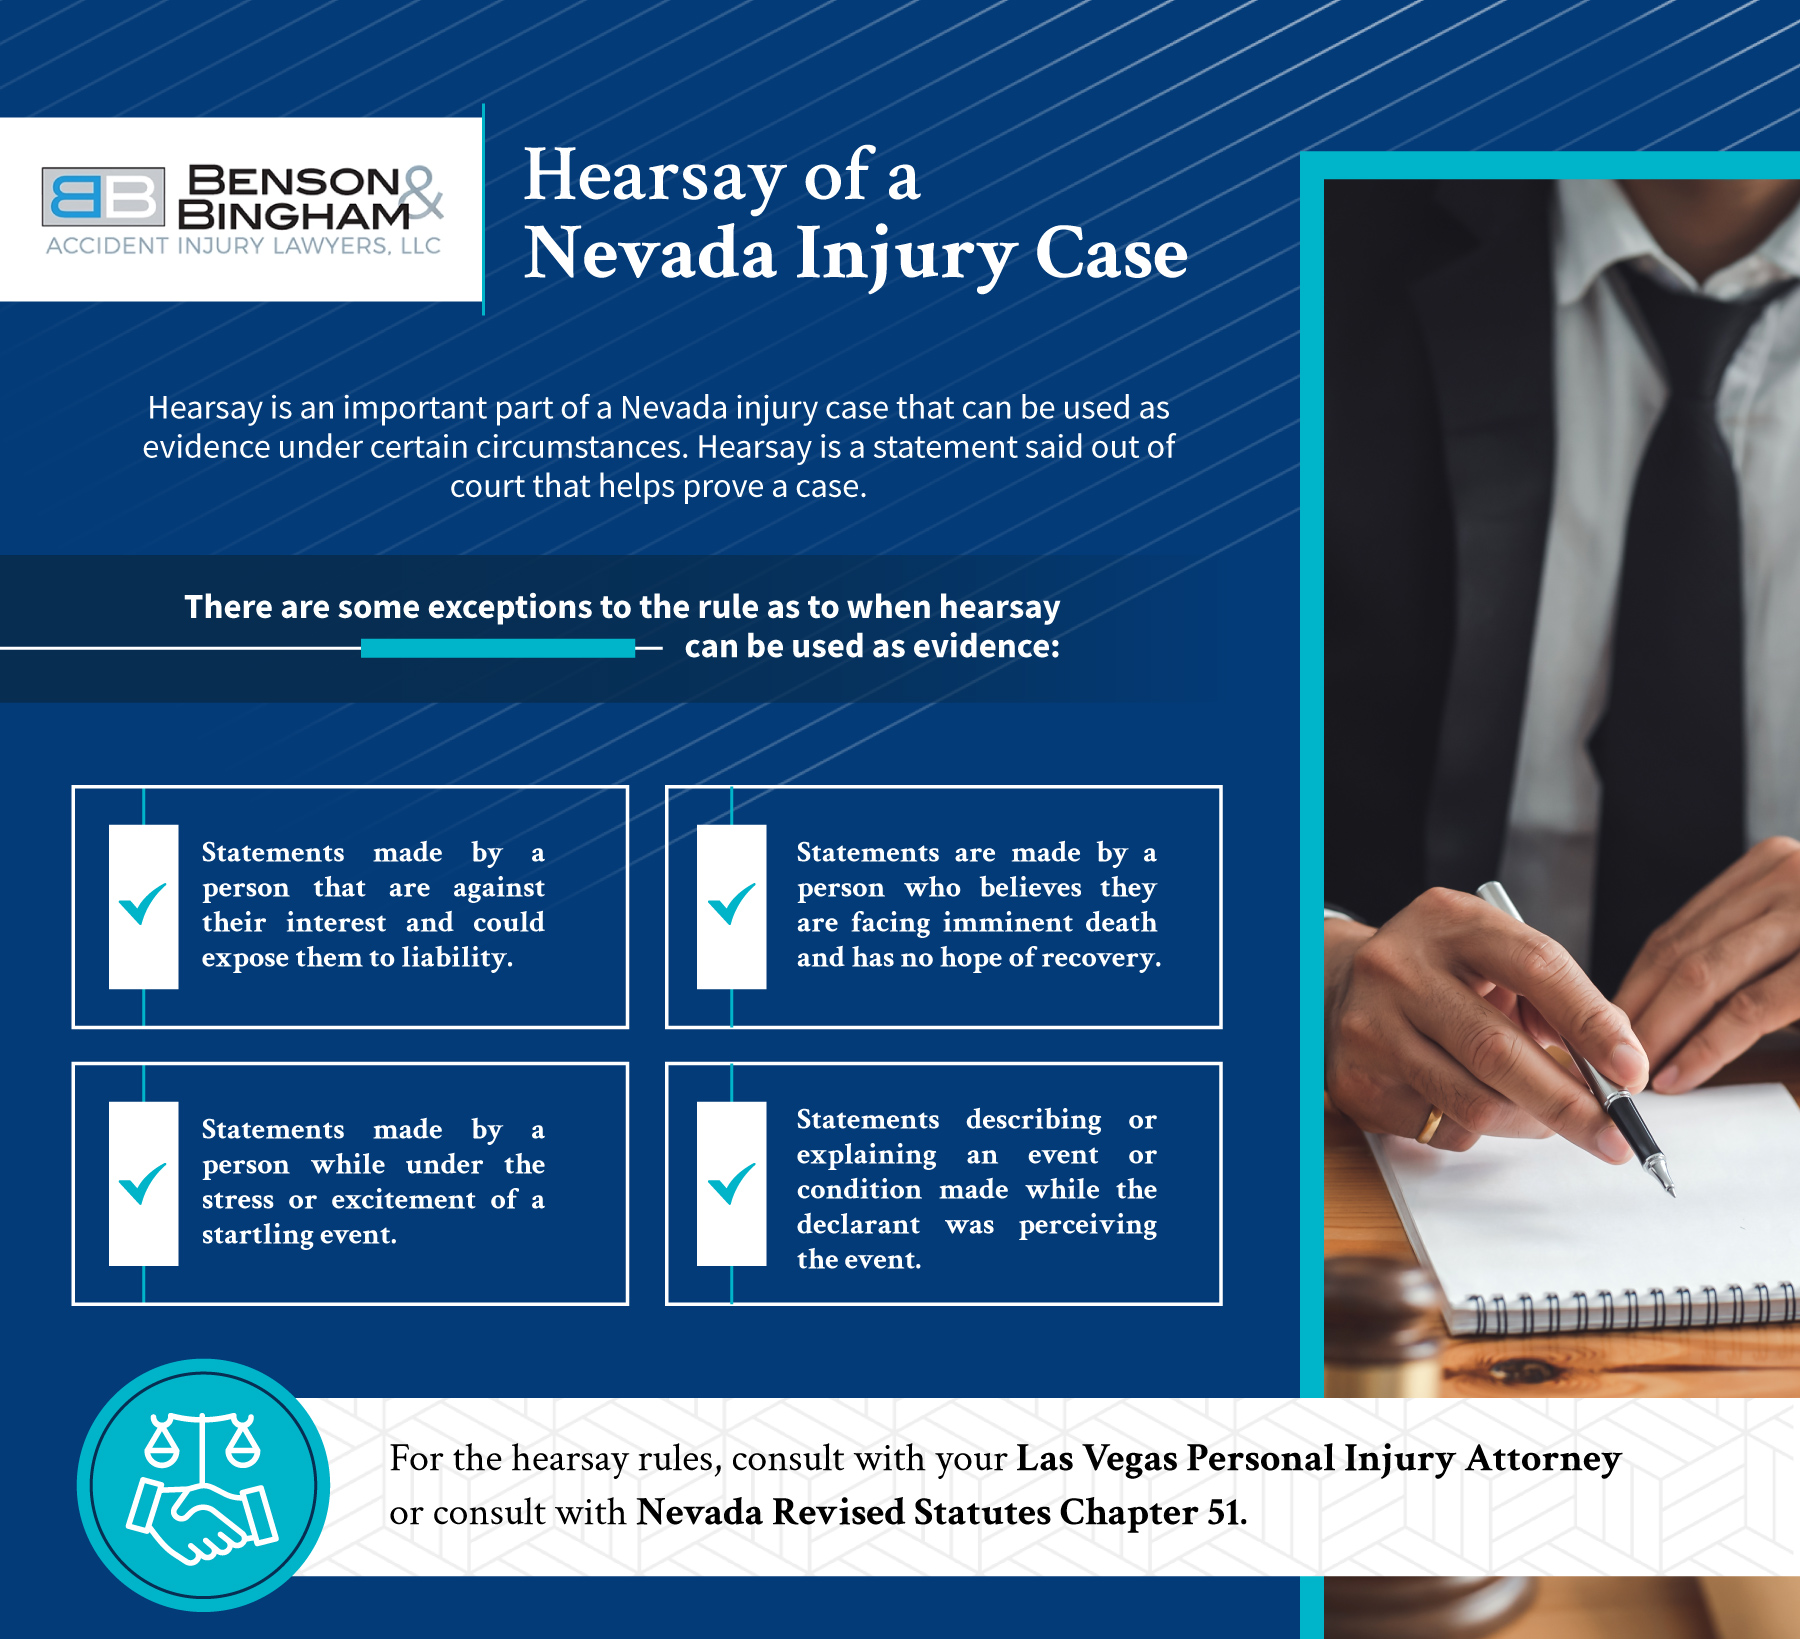 Infographic that explains a hearsay of a Nevada injury case